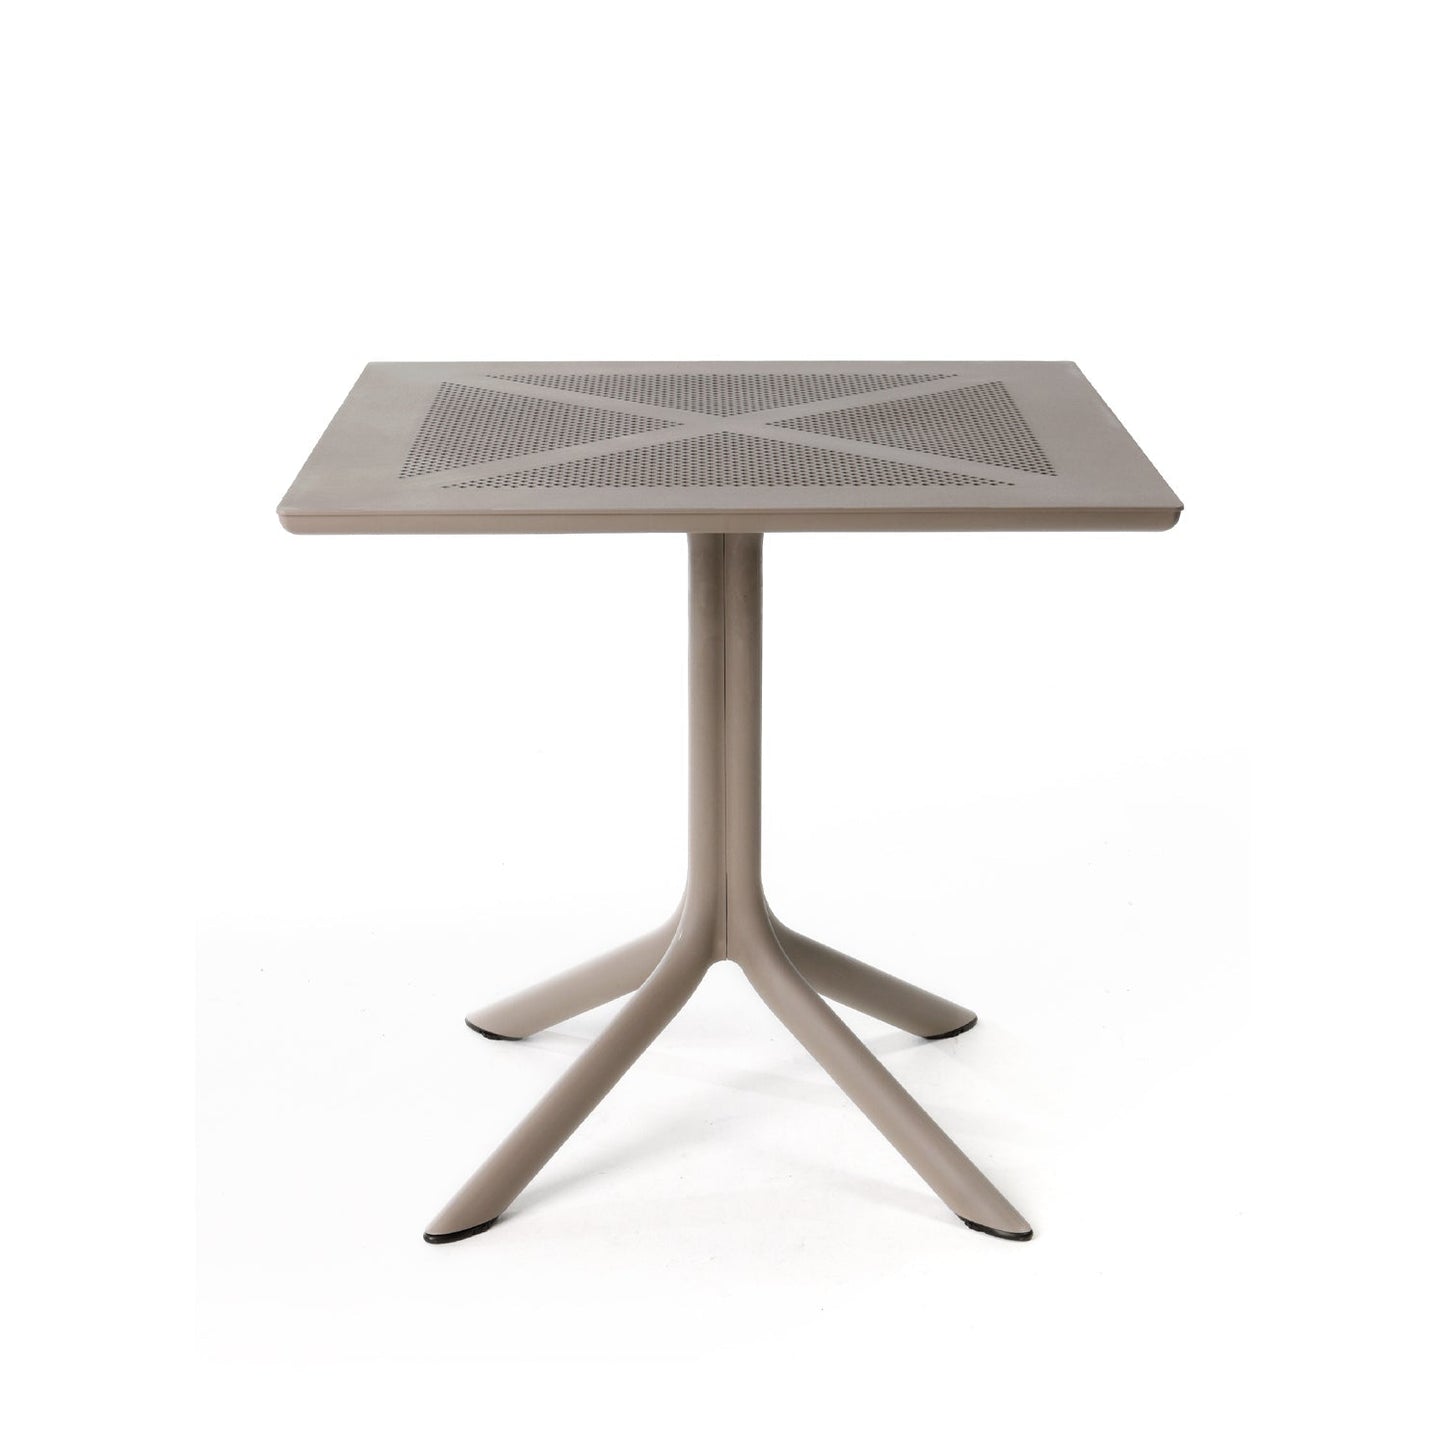 ClipX 70 Garden Table By Nardi In Taupe